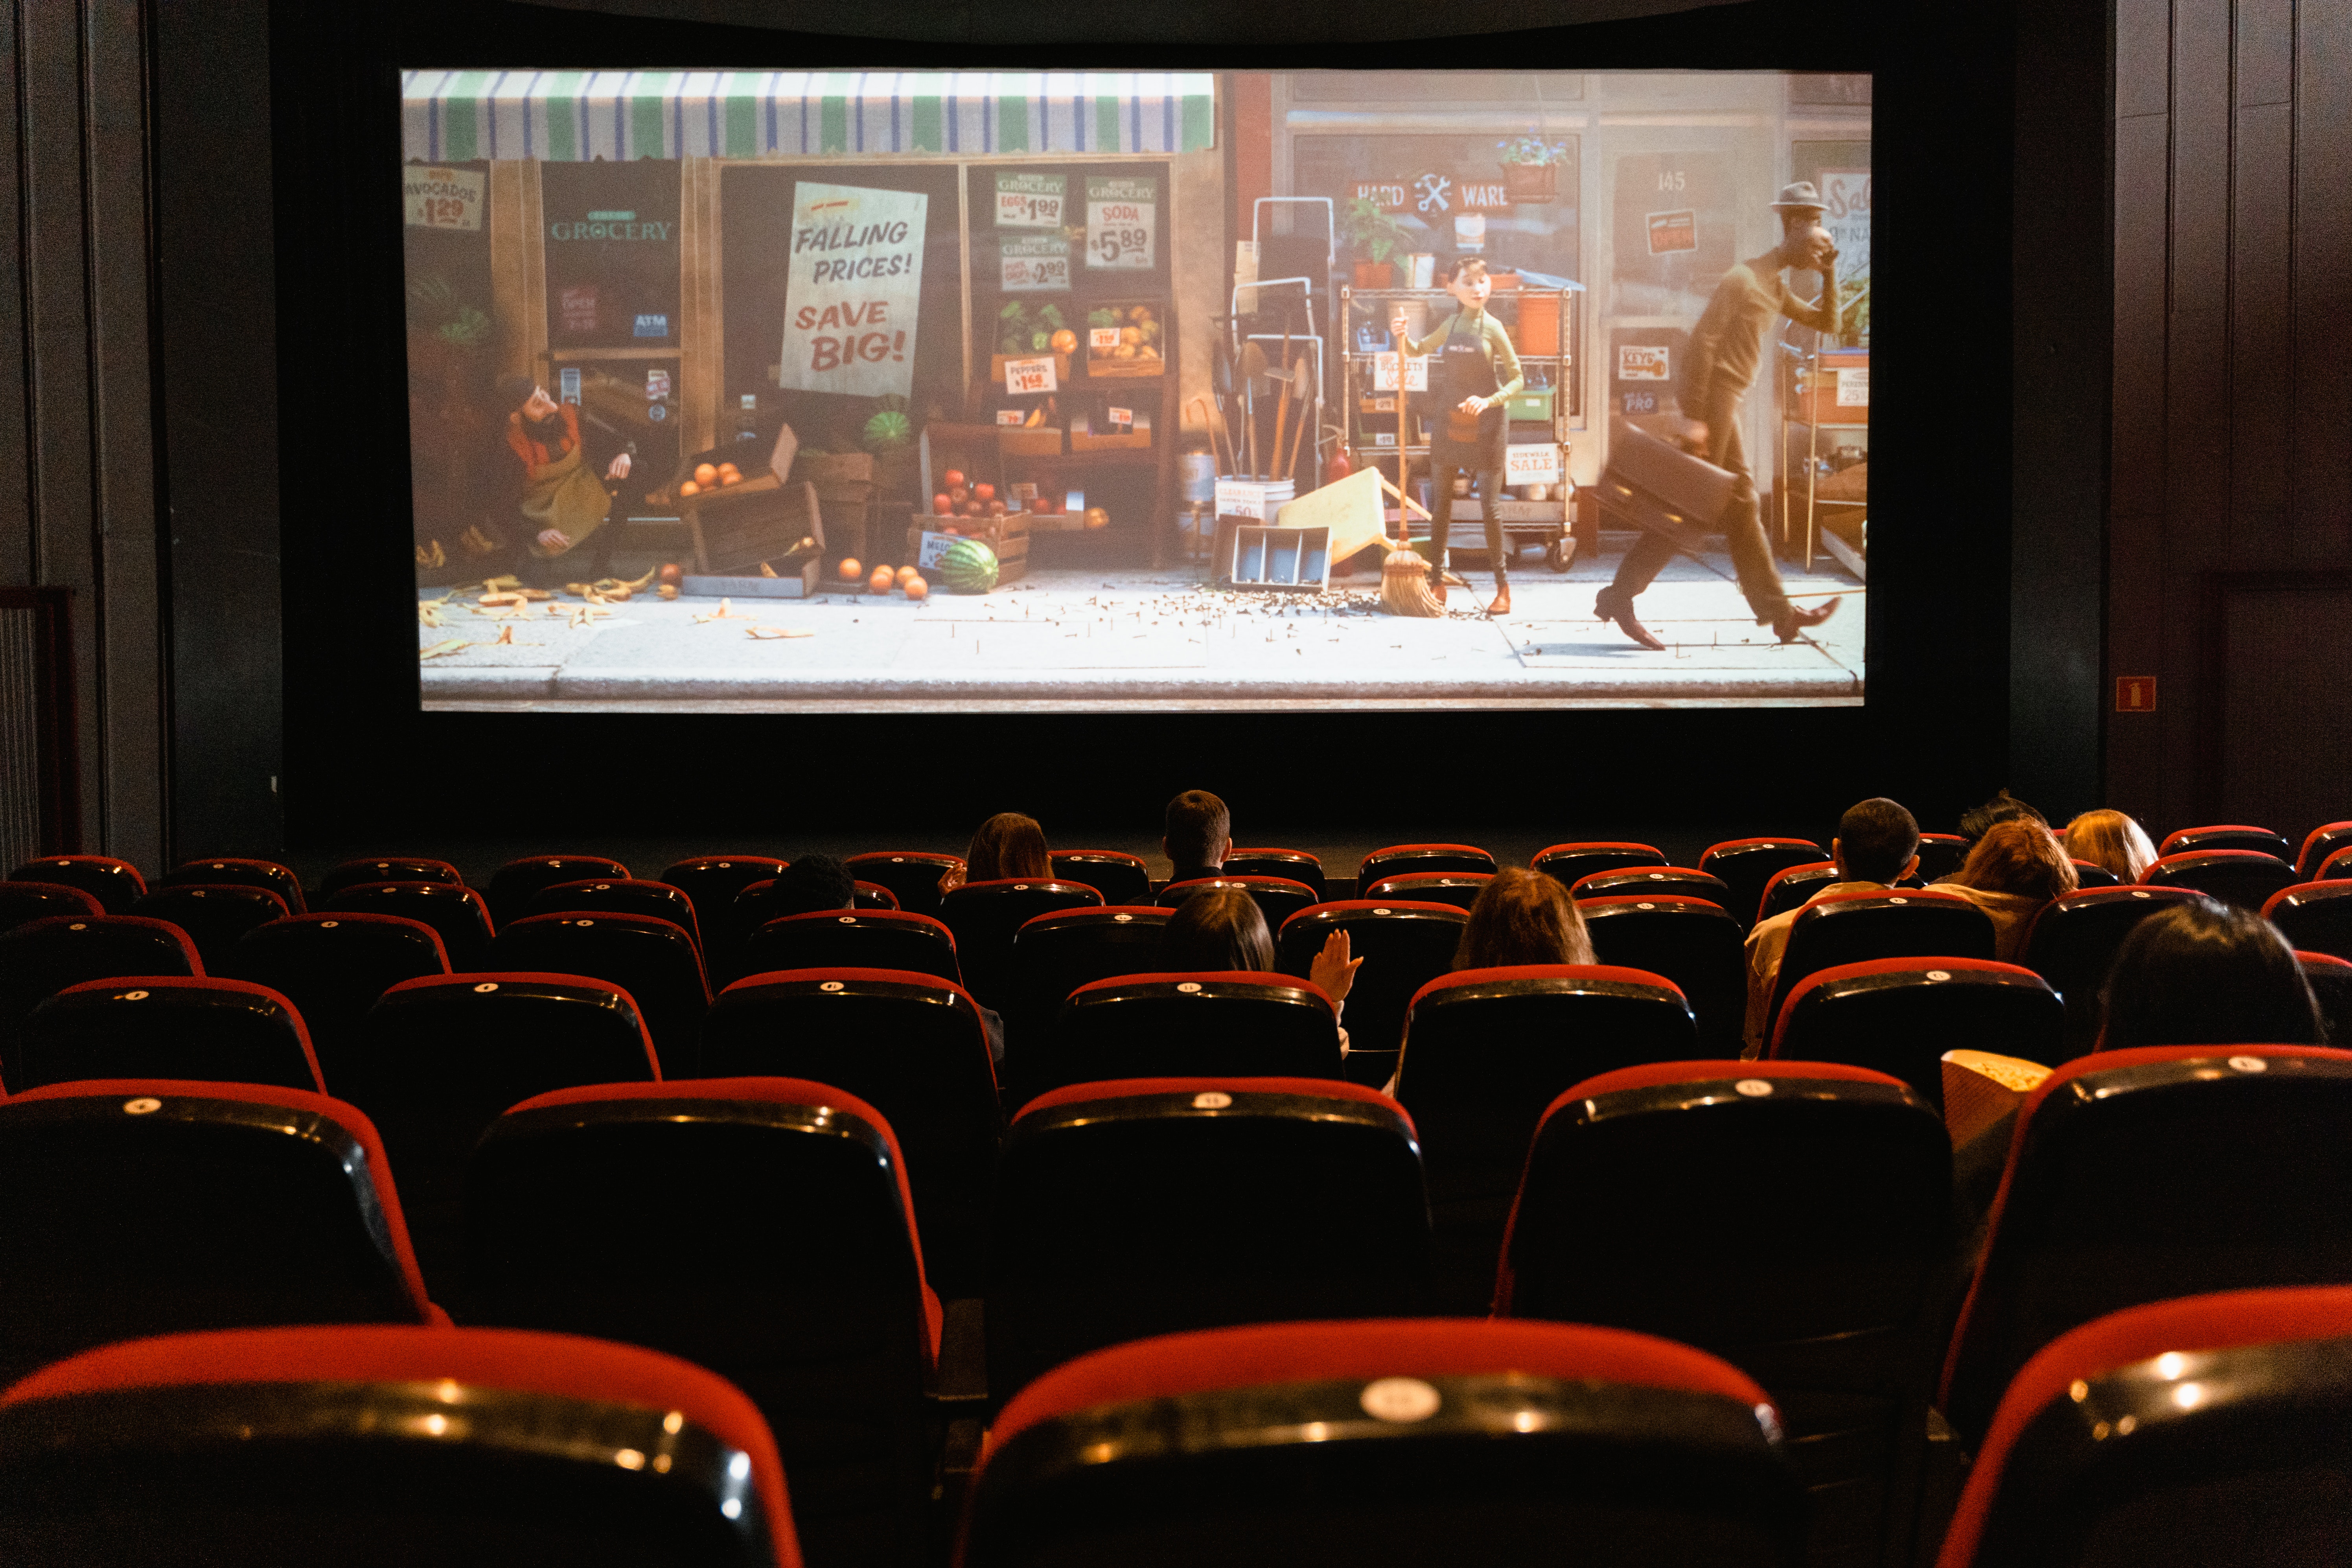 image of the inside of a movie theater, with plush red seats and a movie playing that is an old style storefront